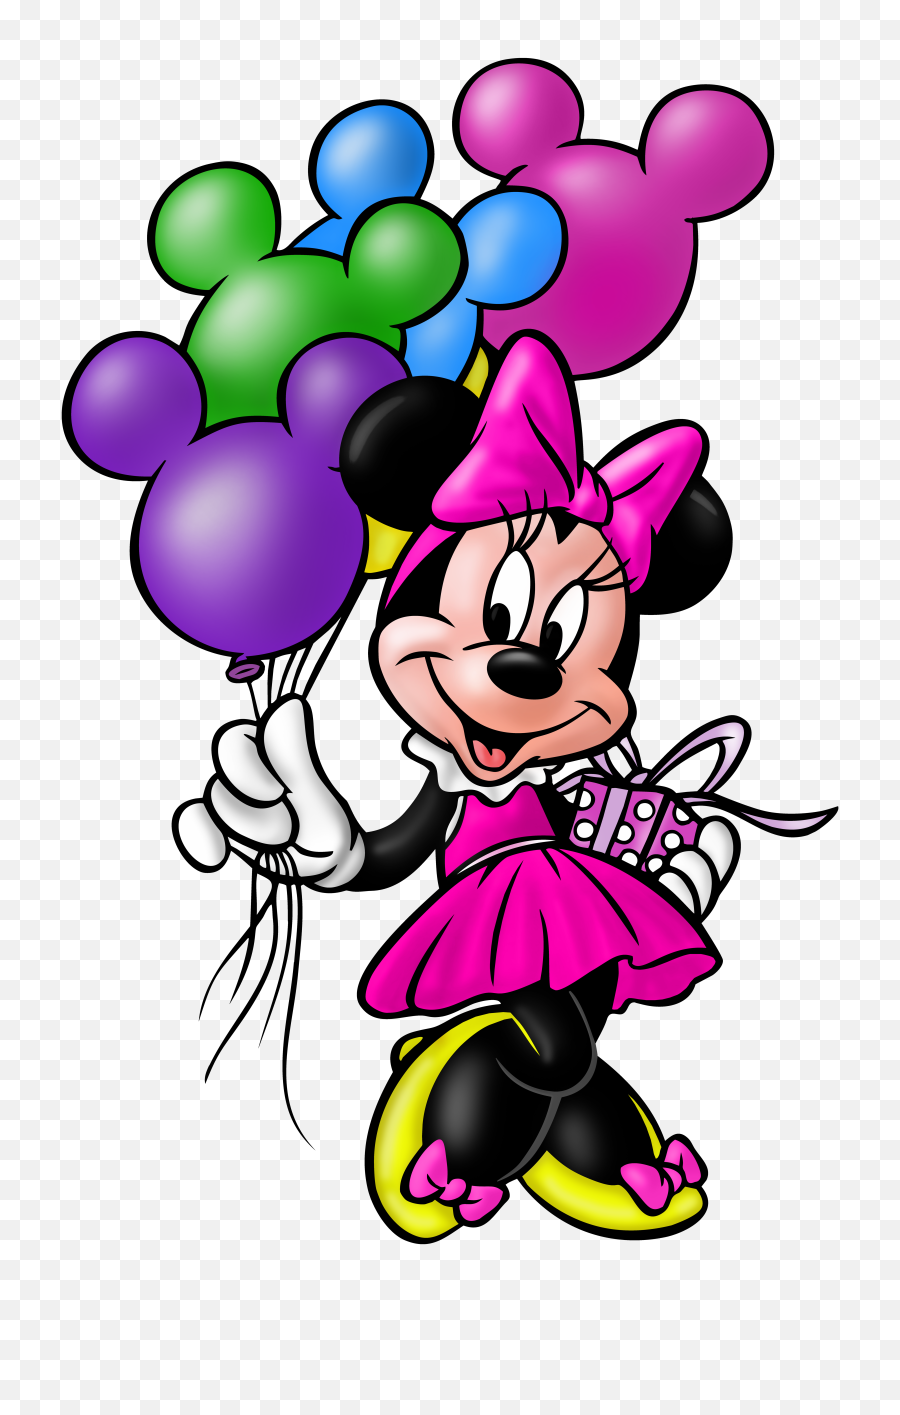 Minnie Mouse Transparent Png Clip Art Image - Minnie Mouse With Balloons,Mickey Mouse Png Images